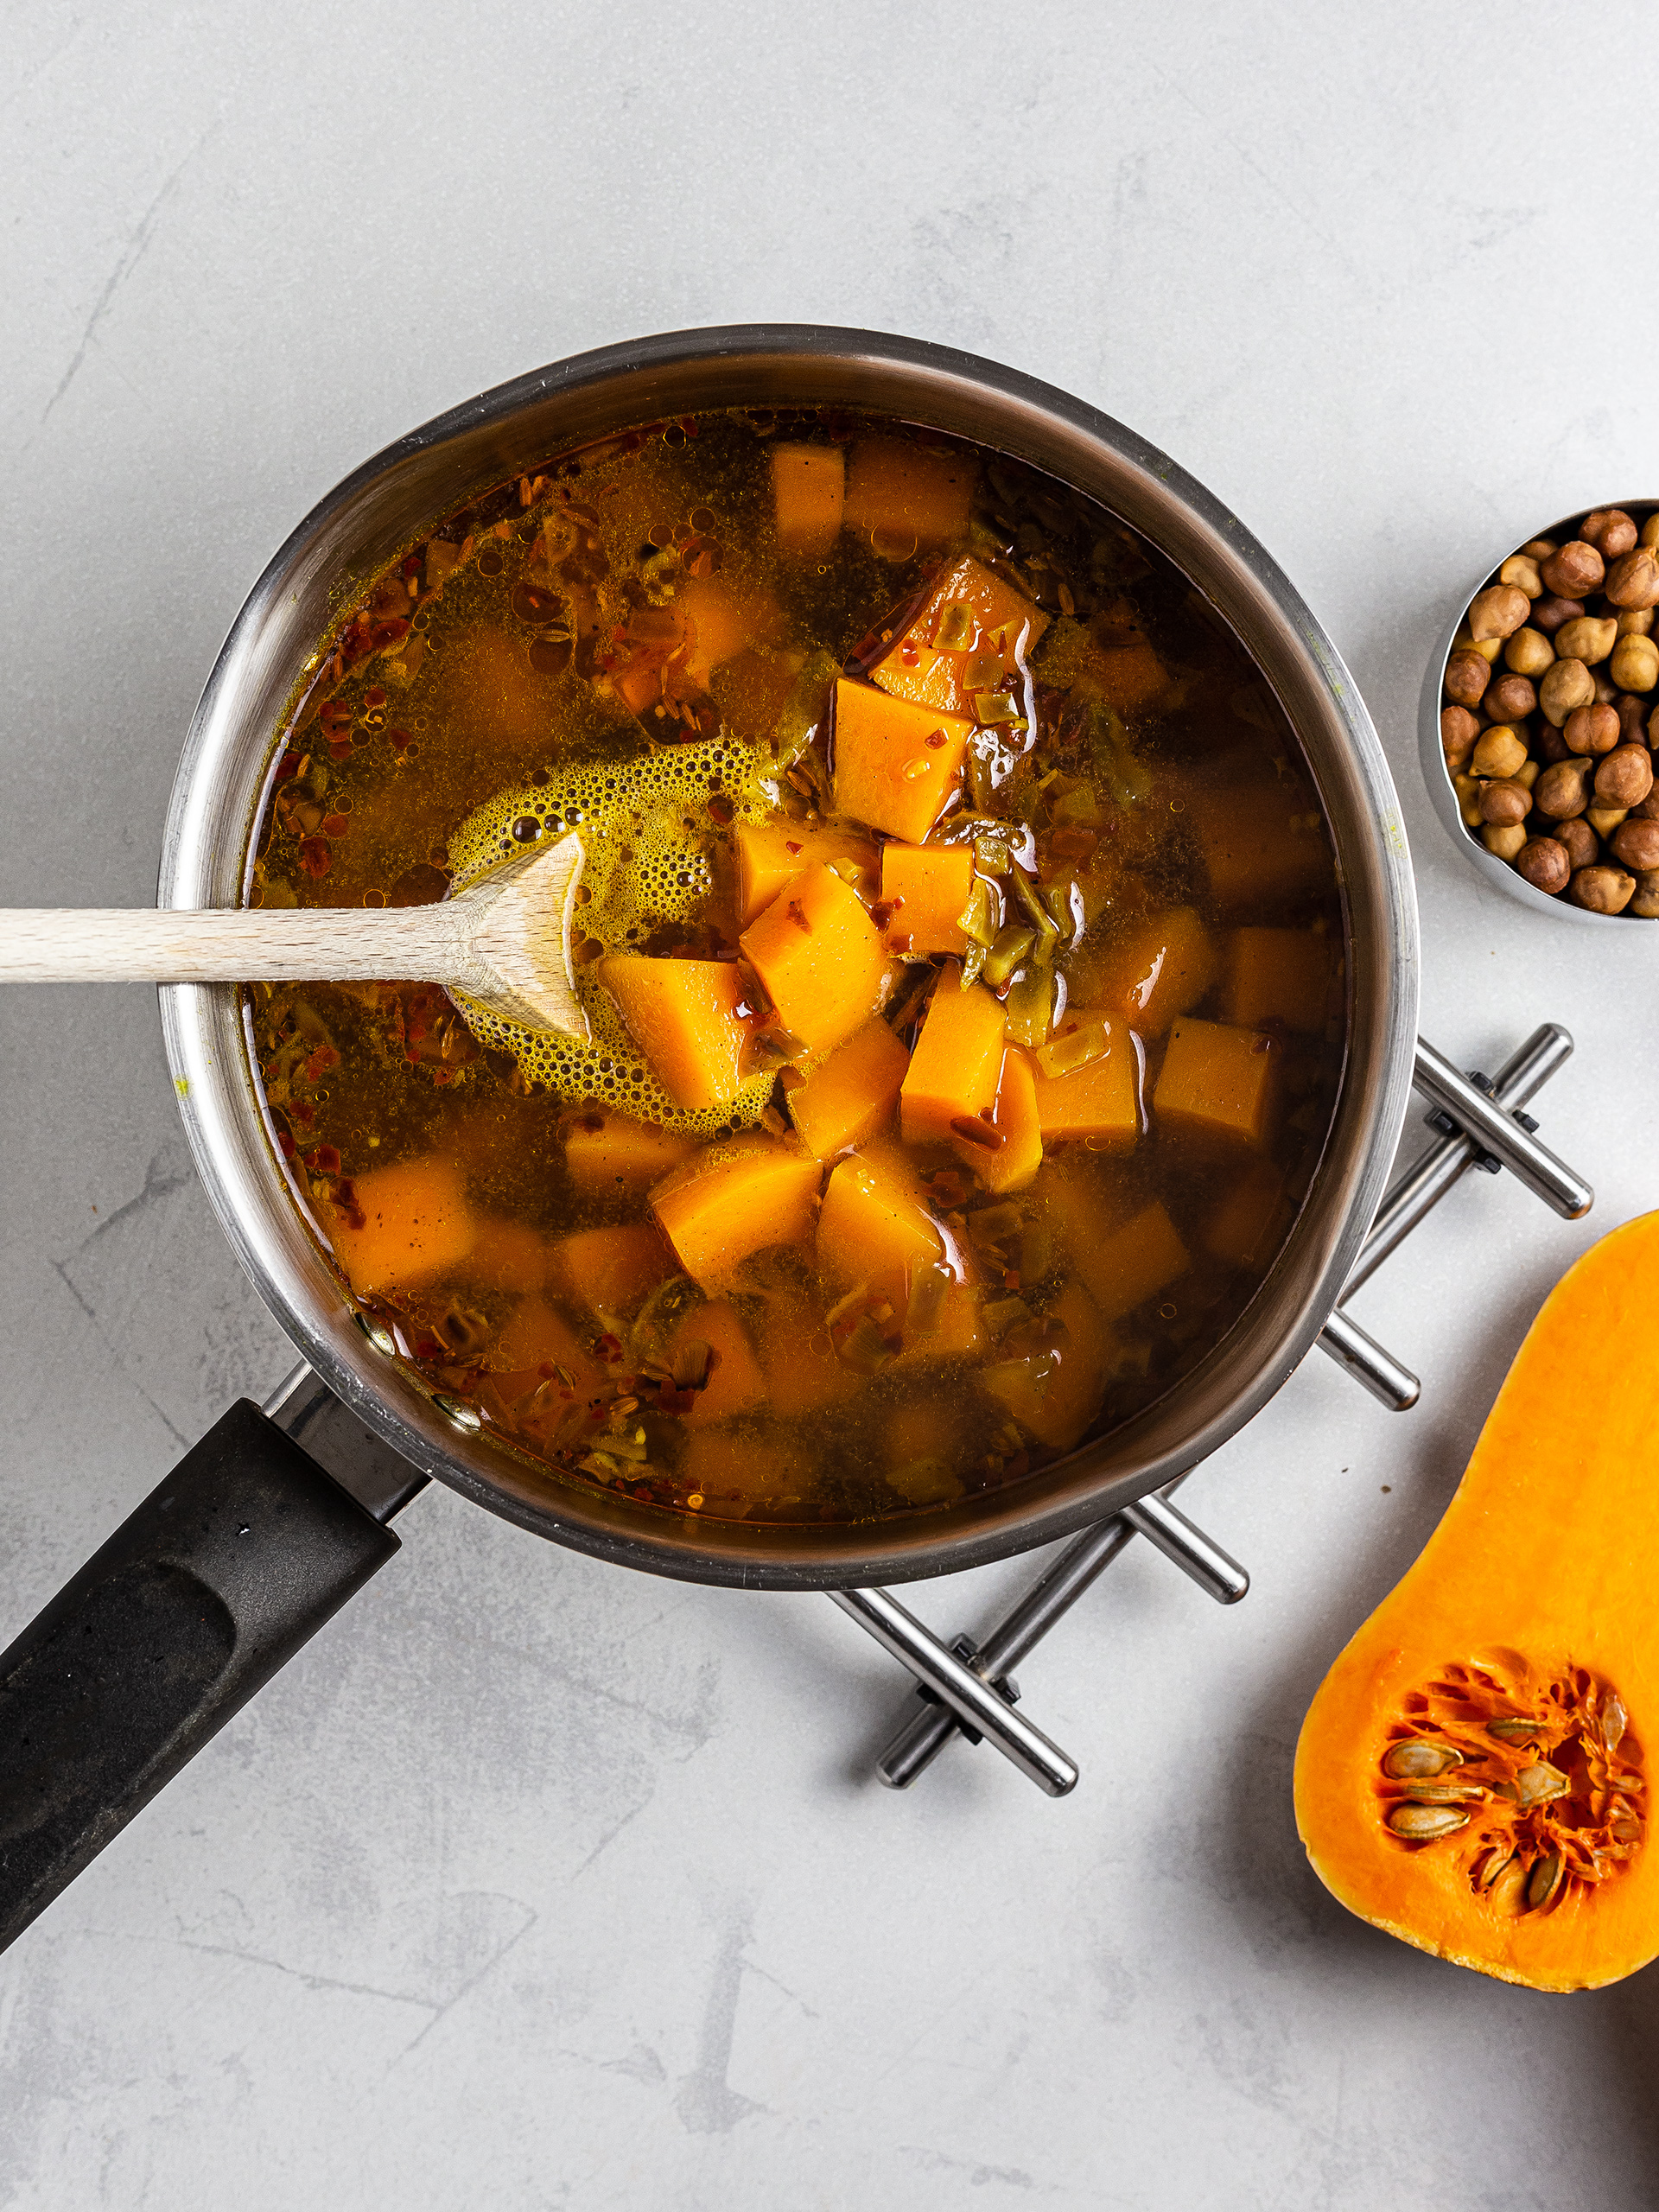 Pumpkin and chickpeas in a pot